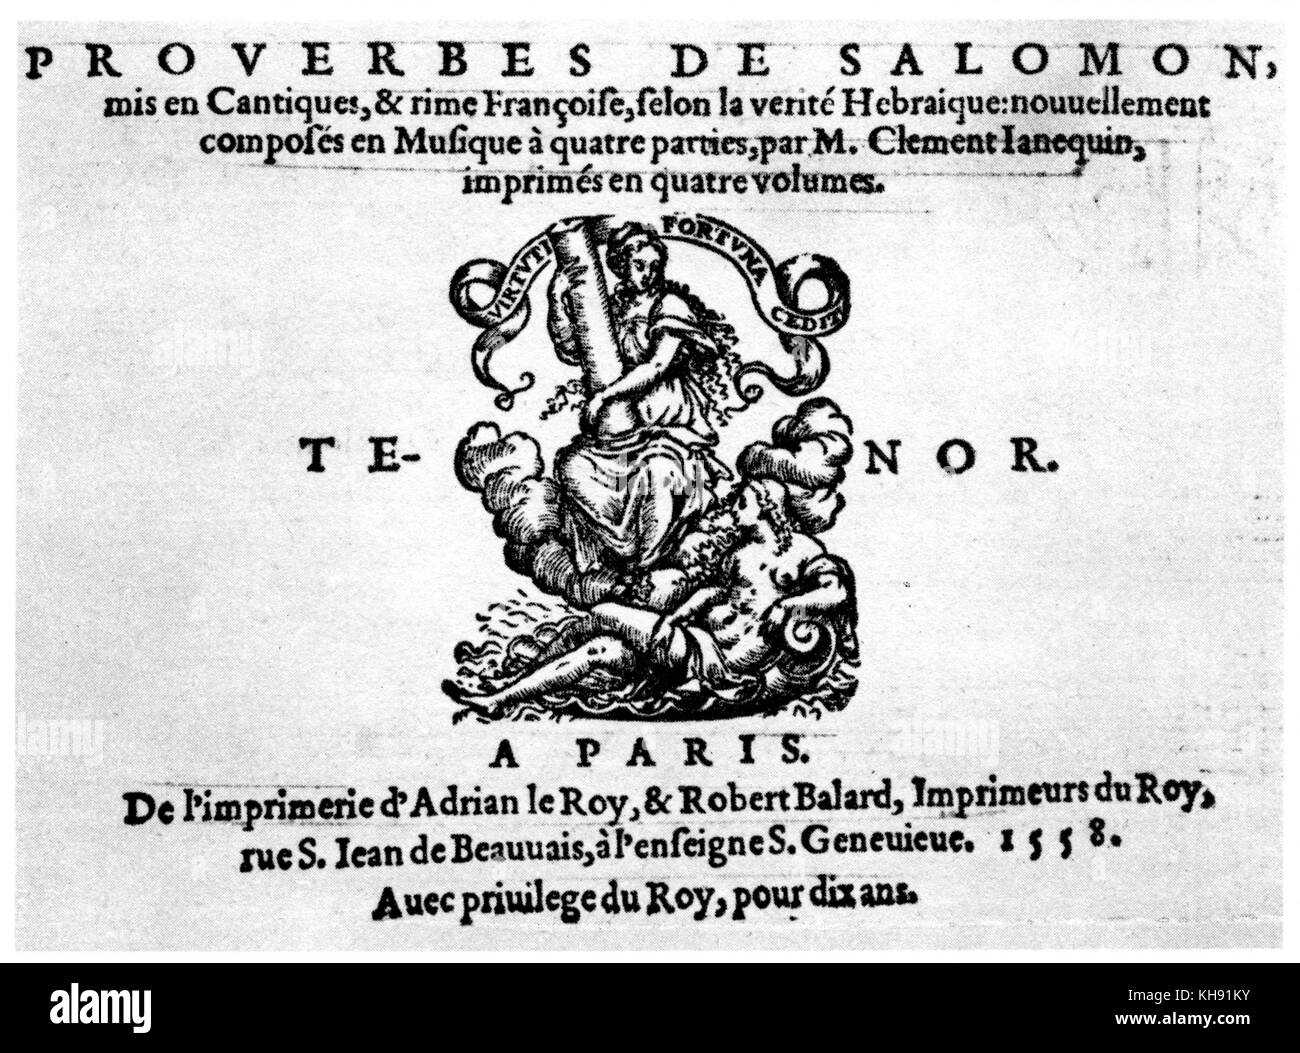 Clement Janequin 's Proverbes de Salomon - title page of score. Song book of canticles and ryhmes in French after the Hebrew.  Published 1558 by Adrian le Roy and Robert Ballard. CJ: French composer, c. 1485 – 1558. Stock Photo